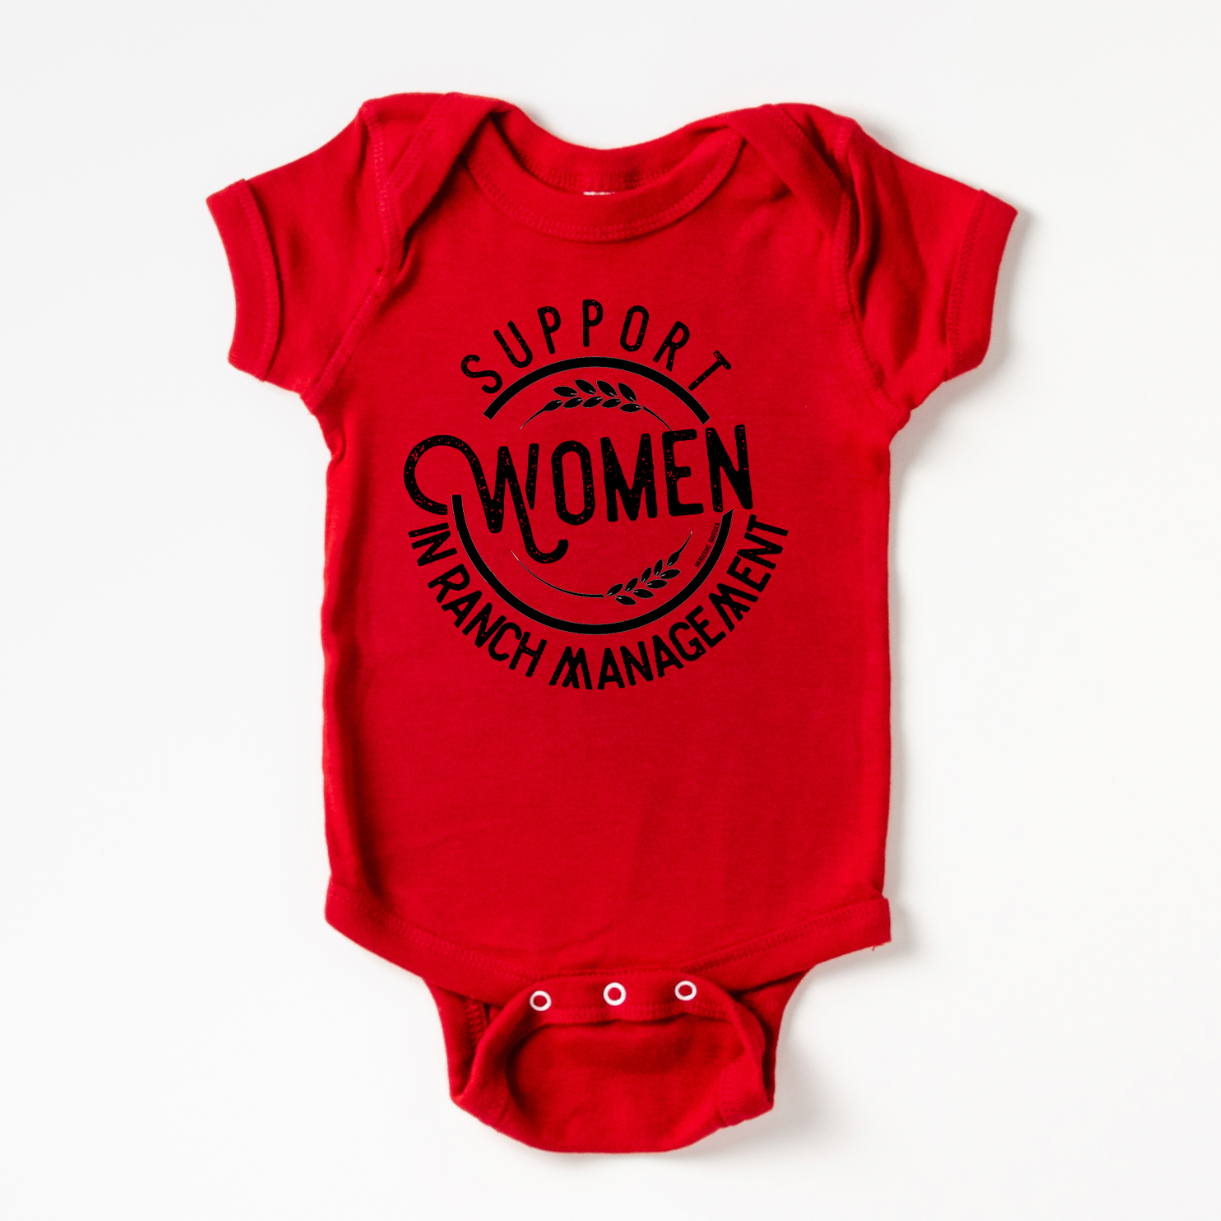 Support Women In Ranch Management One Piece/T-Shirt (Newborn - Youth XL) - Multiple Colors!